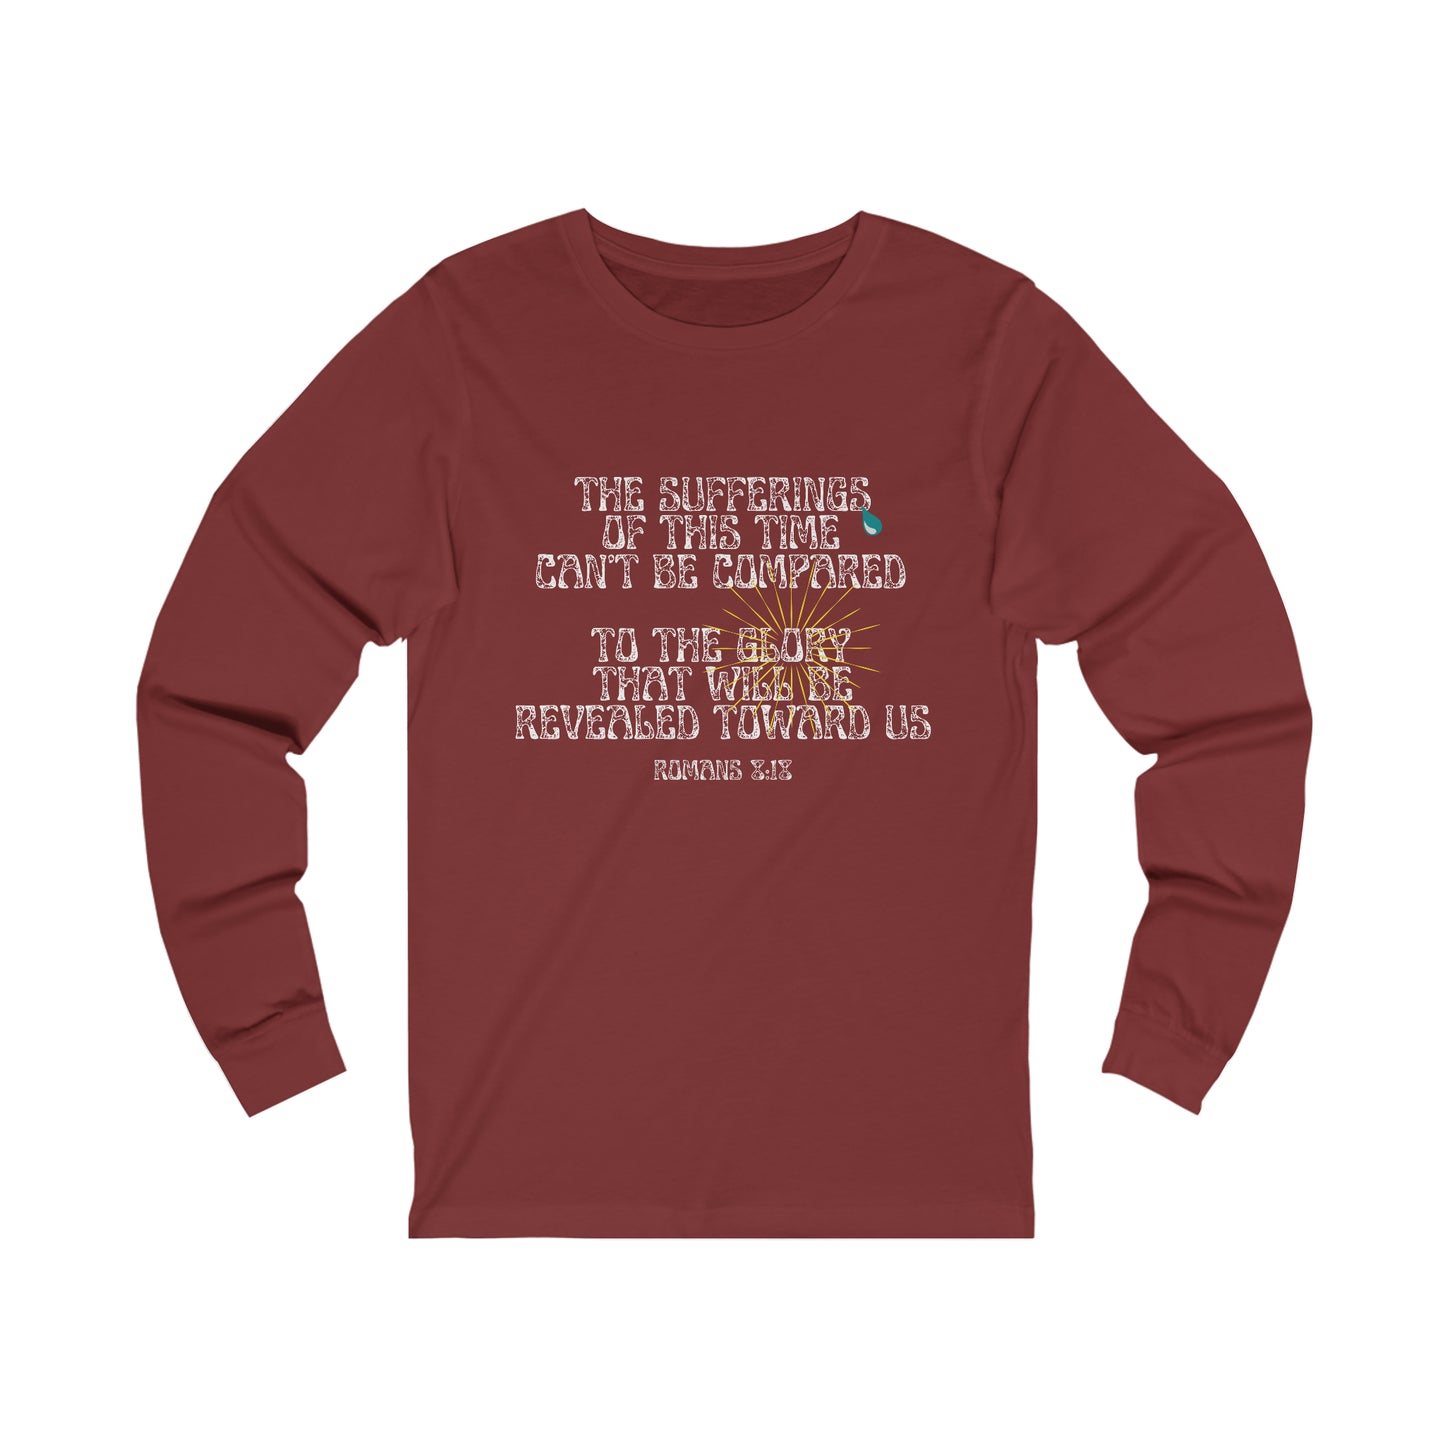 The Sufferings of This Present Time Unisex Jersey Long Sleeve Tee